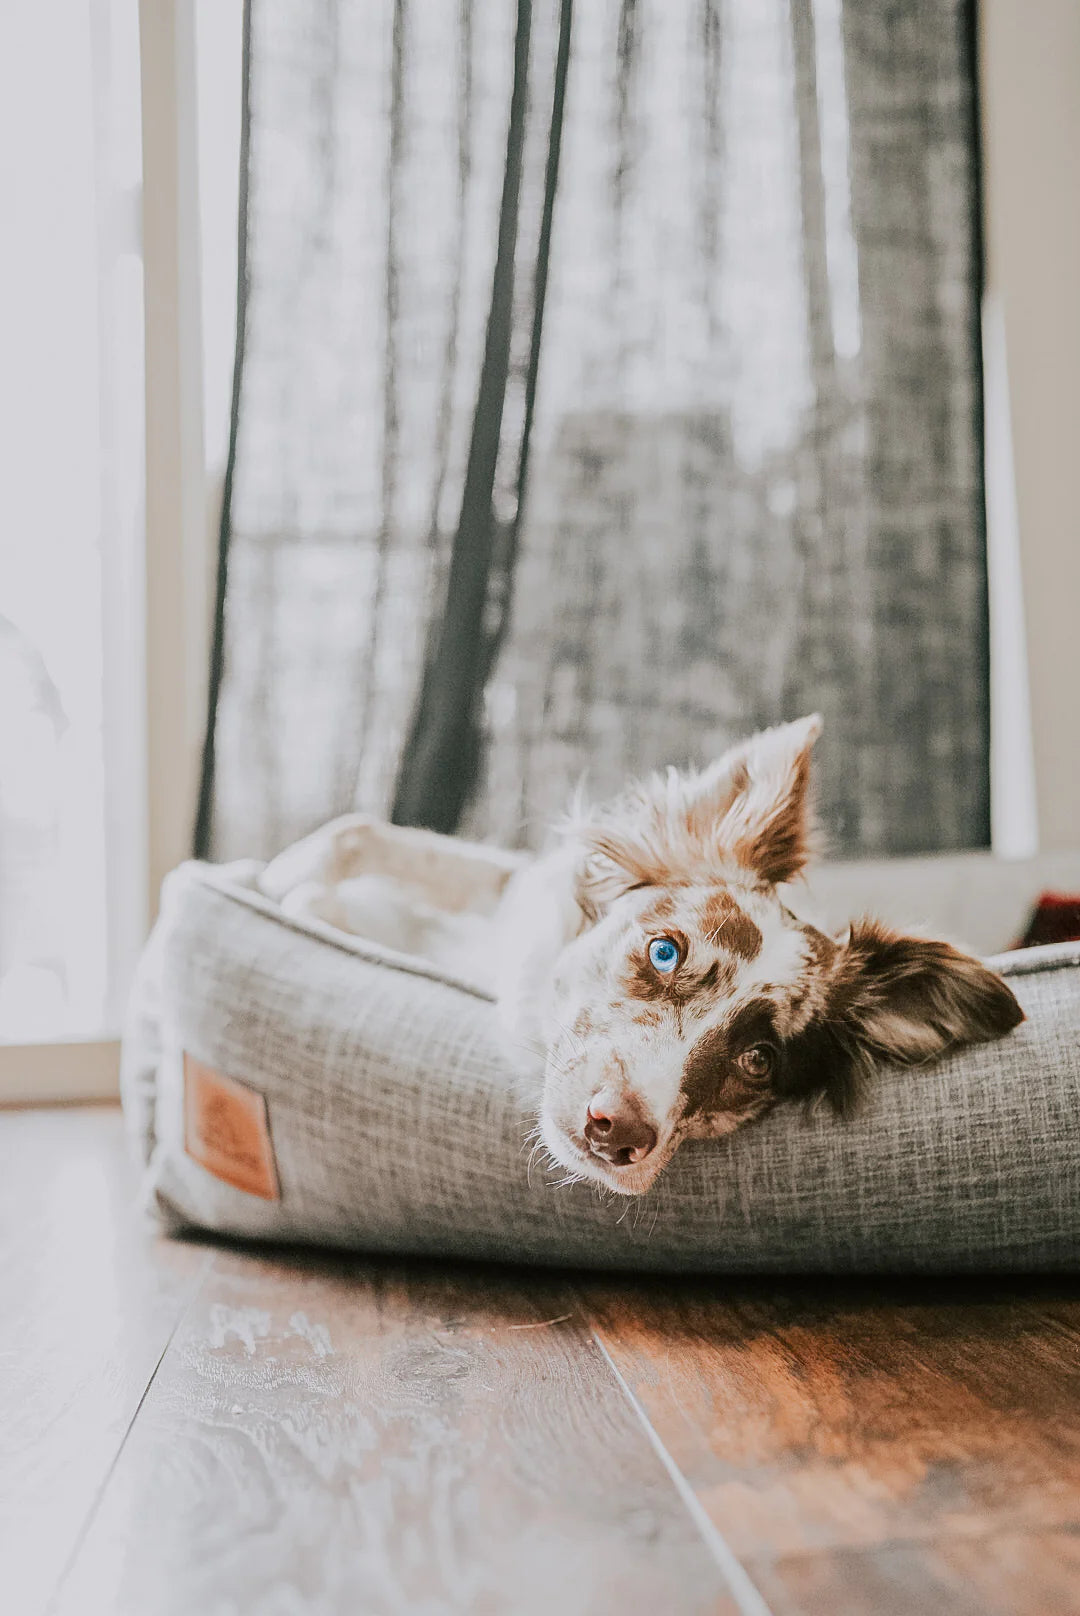 Orthopaedic Dog Beds: The Best Thing for a Happier and Healthier Pup